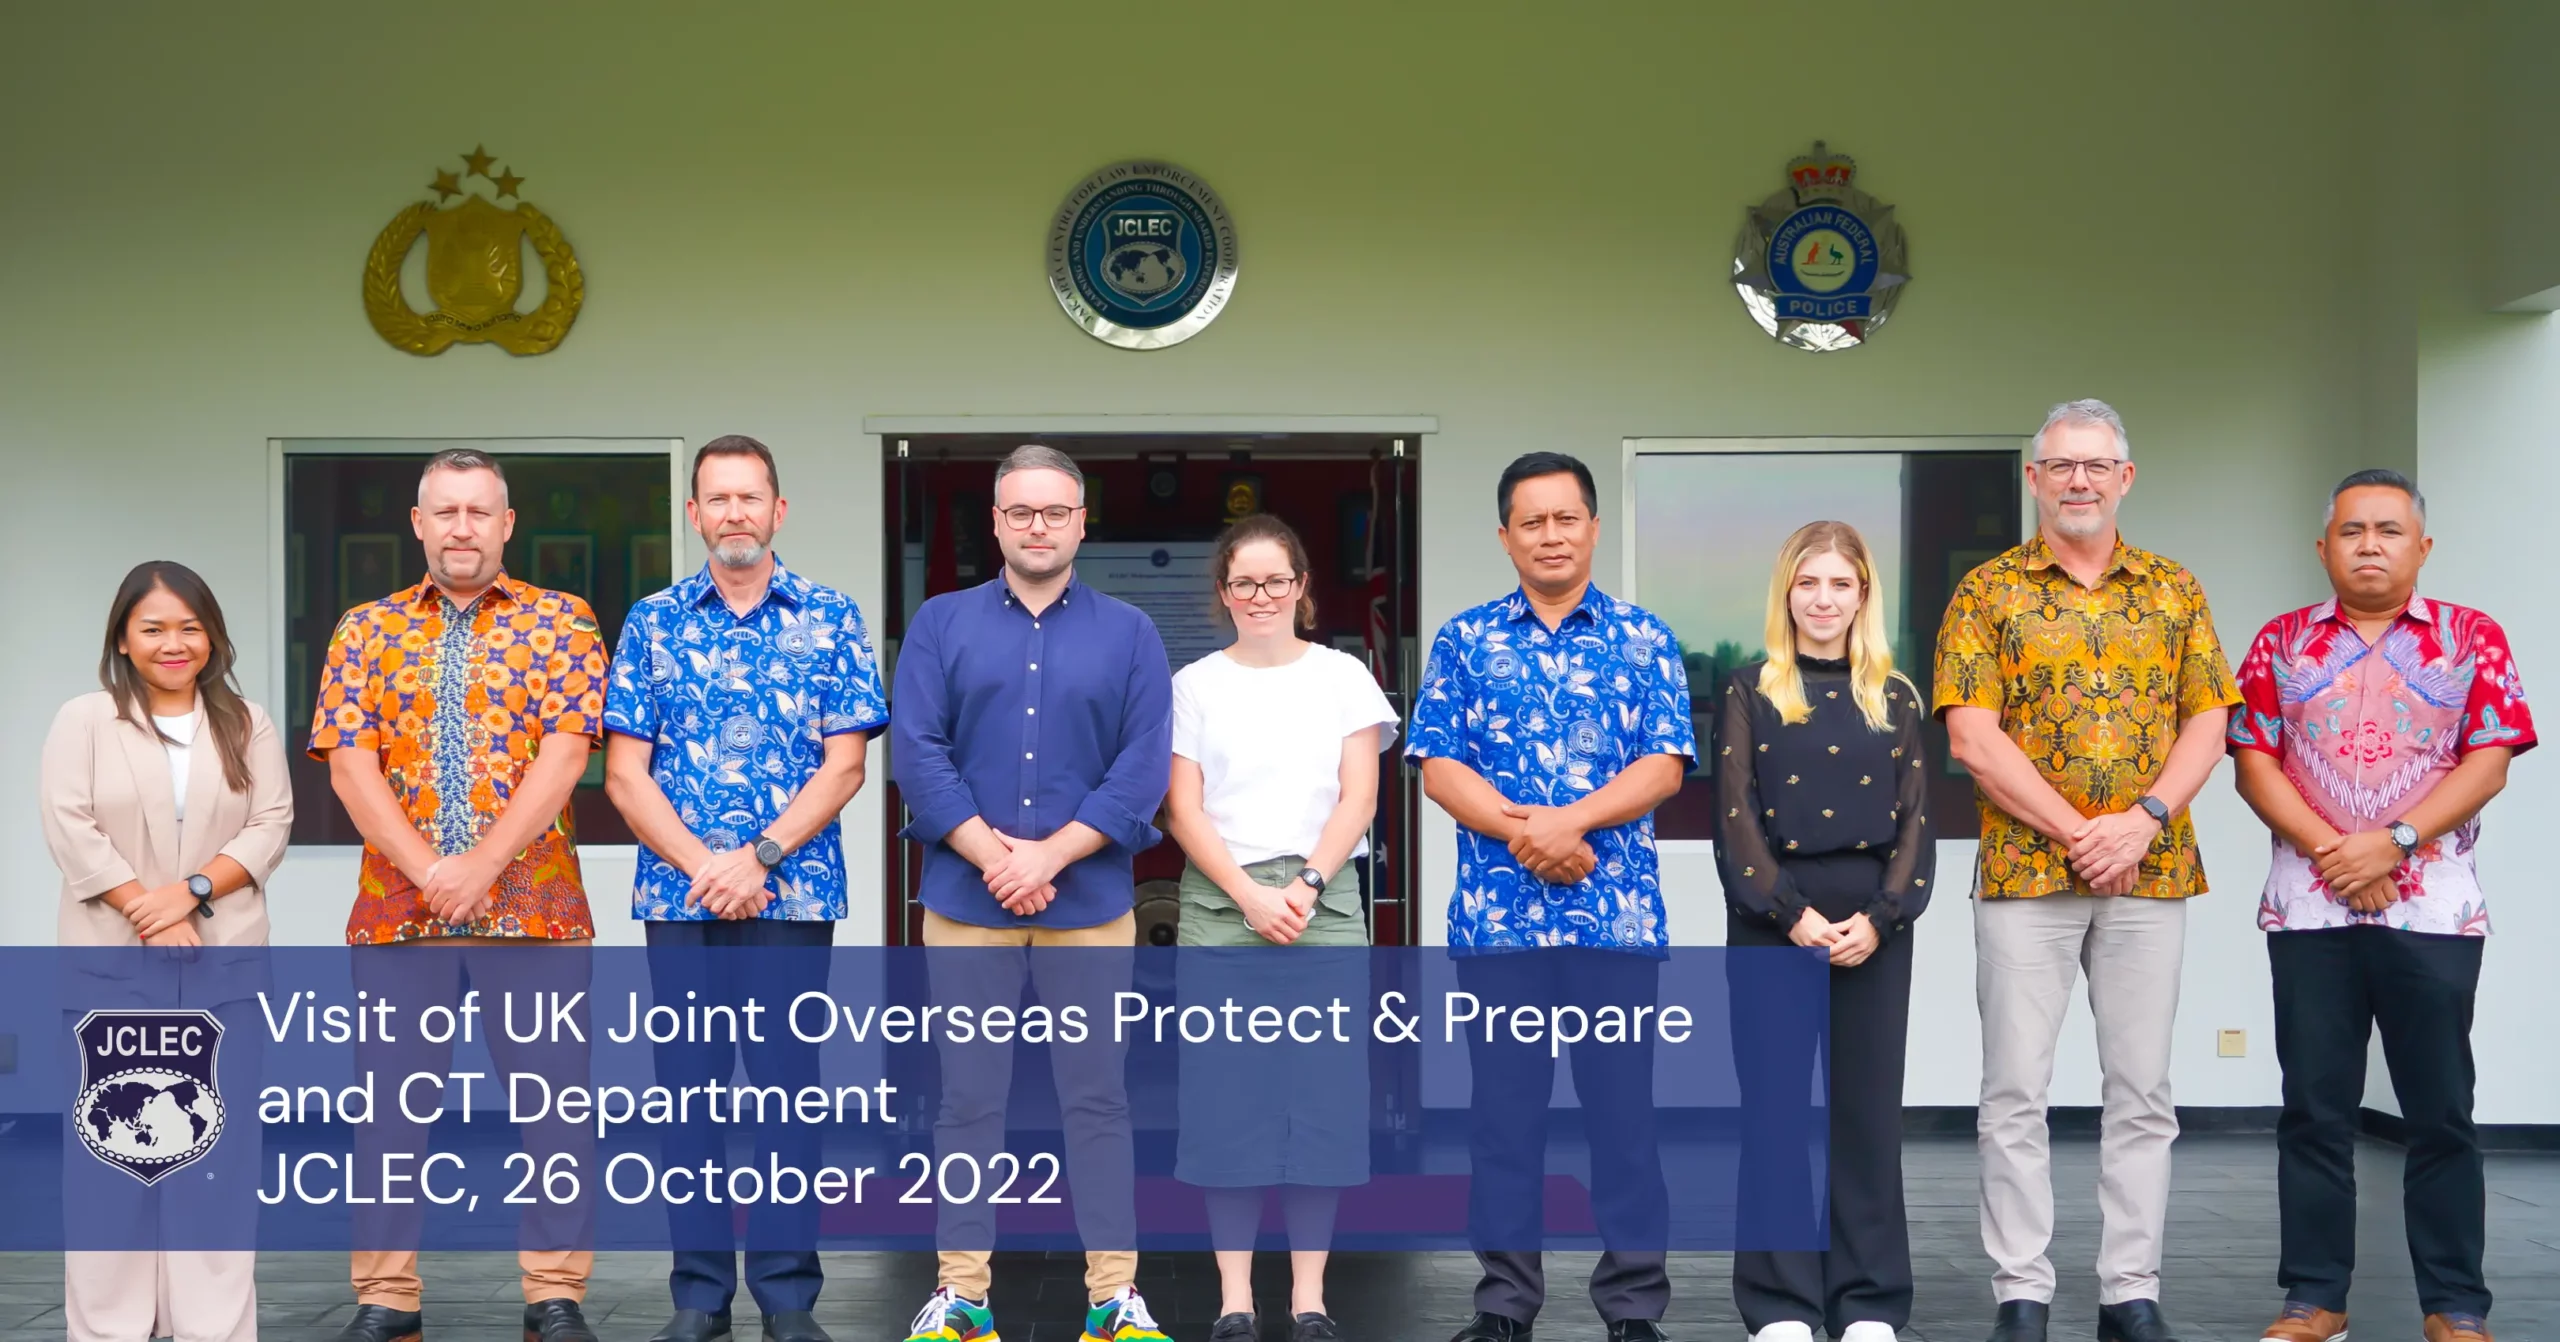 The Official Photograph of UK Joint Overseas Protect & Prepare and CT Department